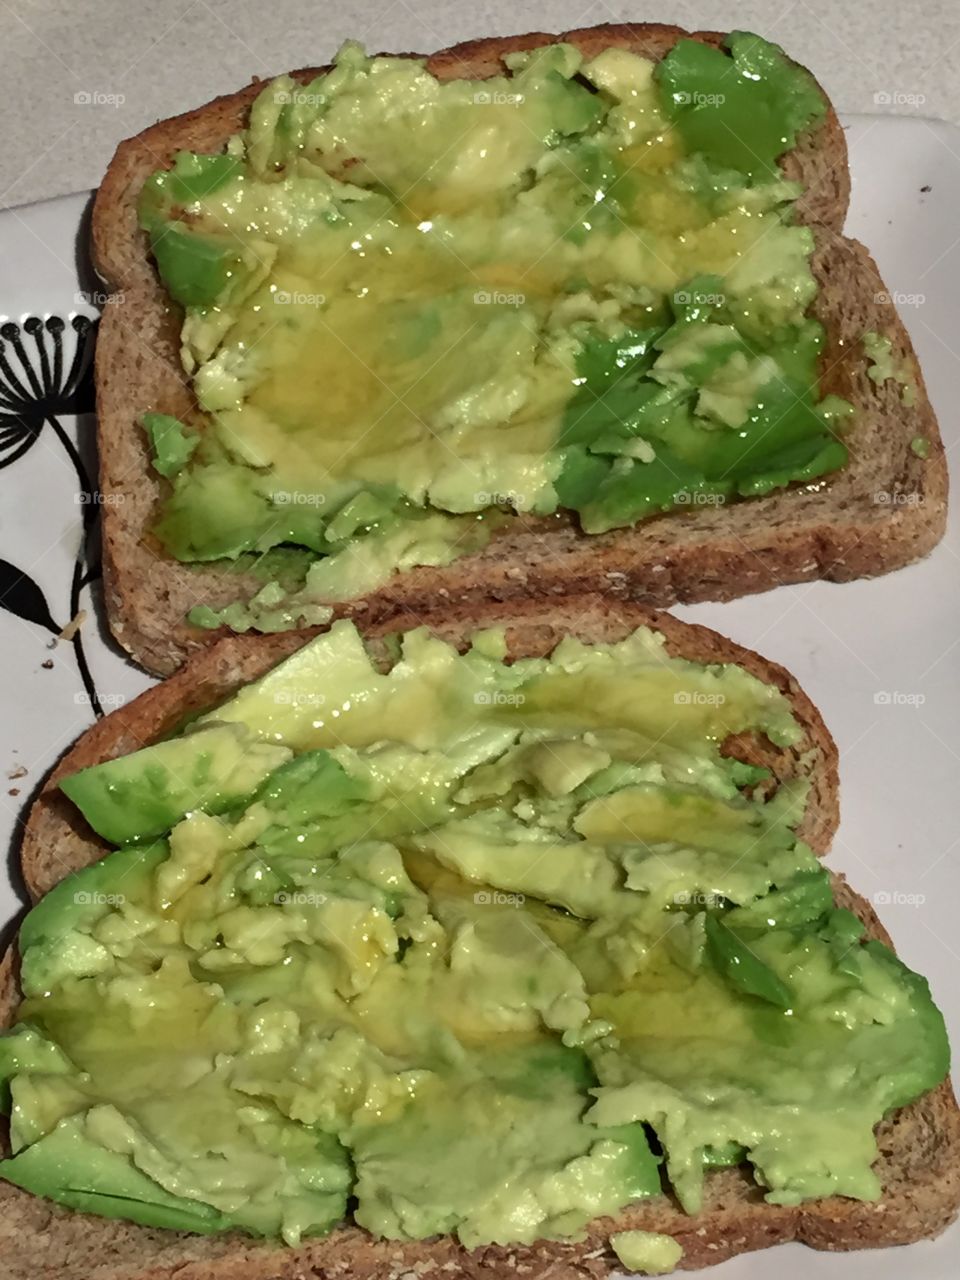 Avocado and honey toast. Because sometime we look for too complicated receipes. This take 2 minutes to do and its so good !!!! 